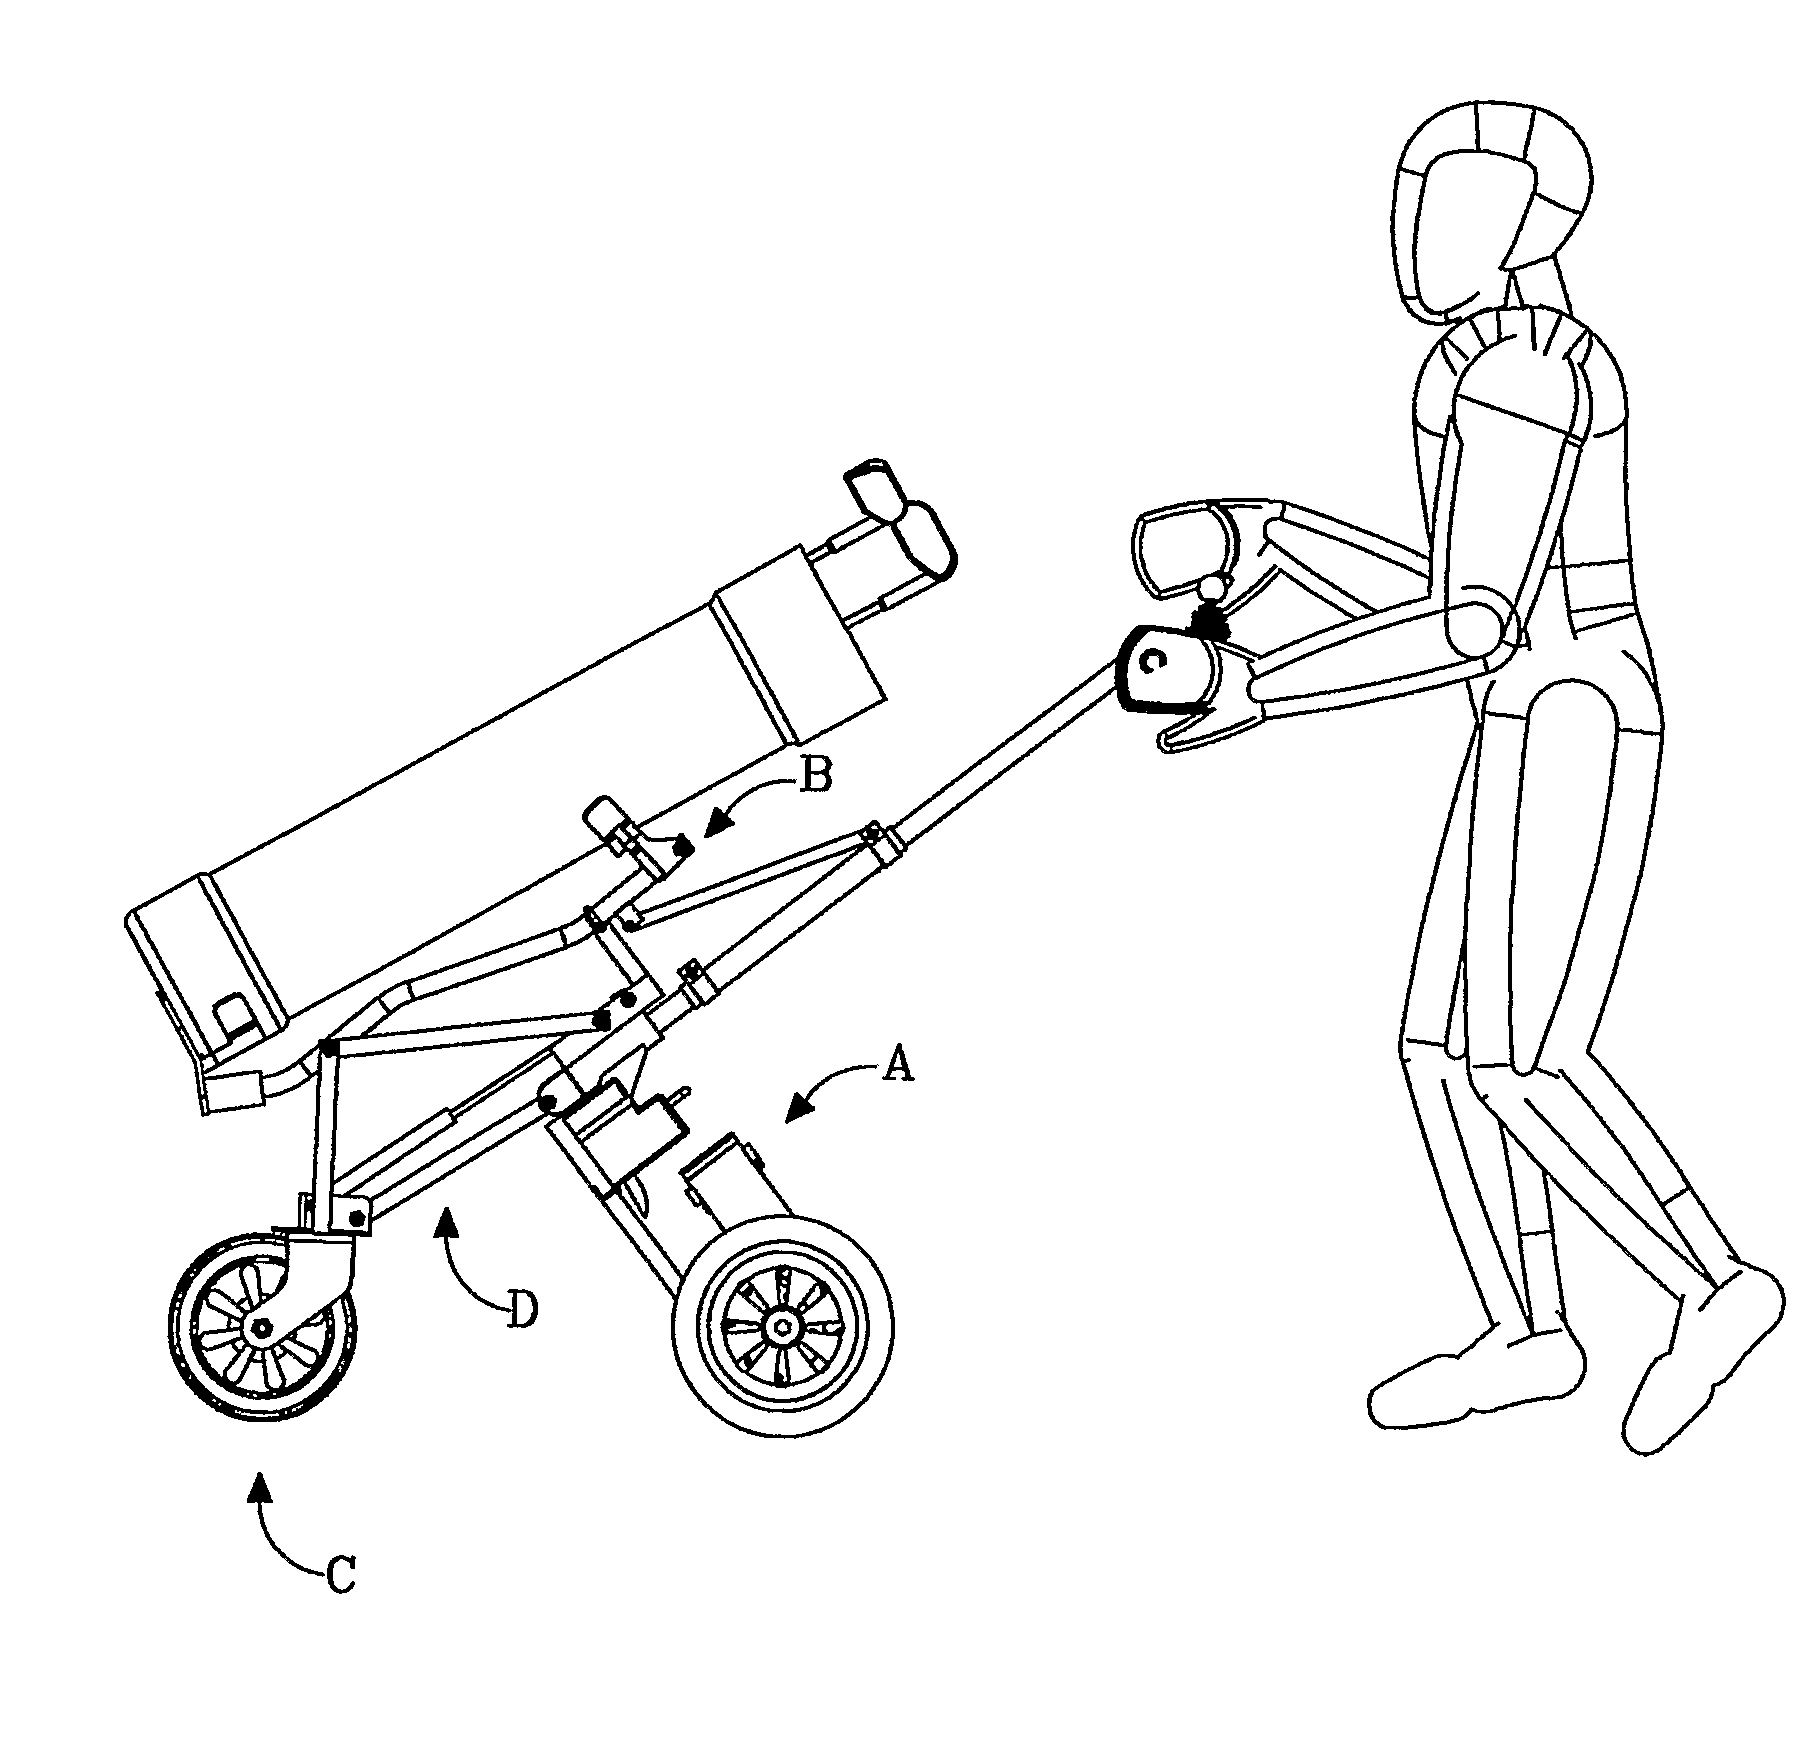 Self-powered vehicle with selectable operational modes